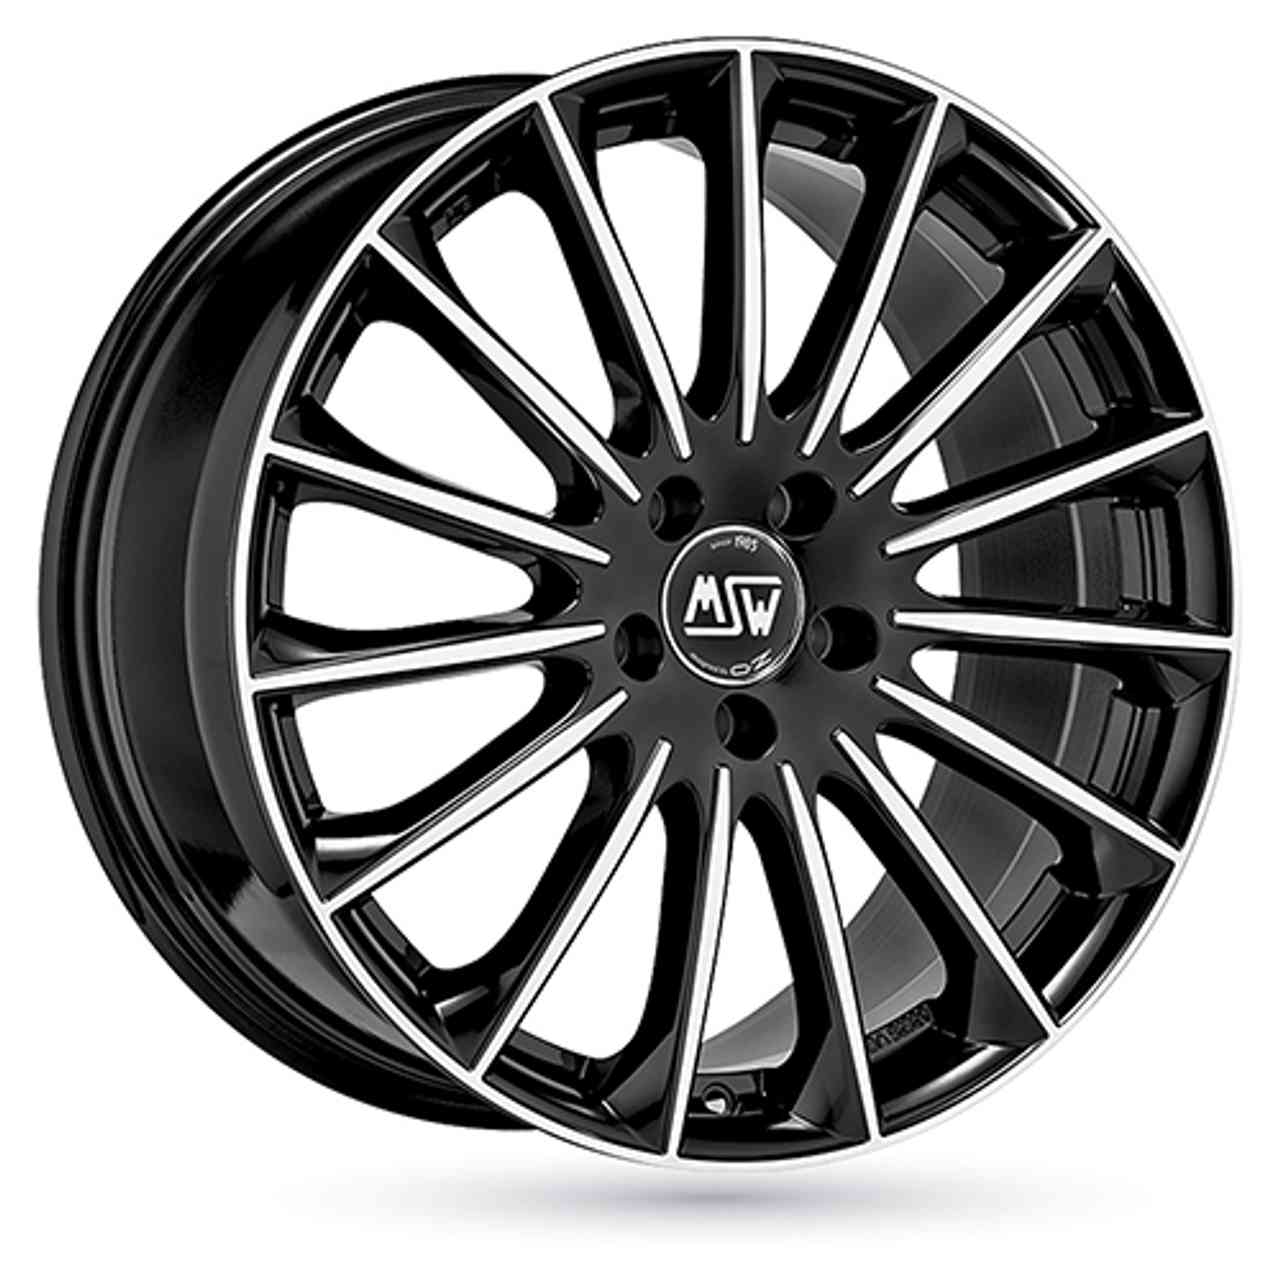 MSW (OZ) MSW 30 gloss black full polished 7.5Jx18 5x112 ET44